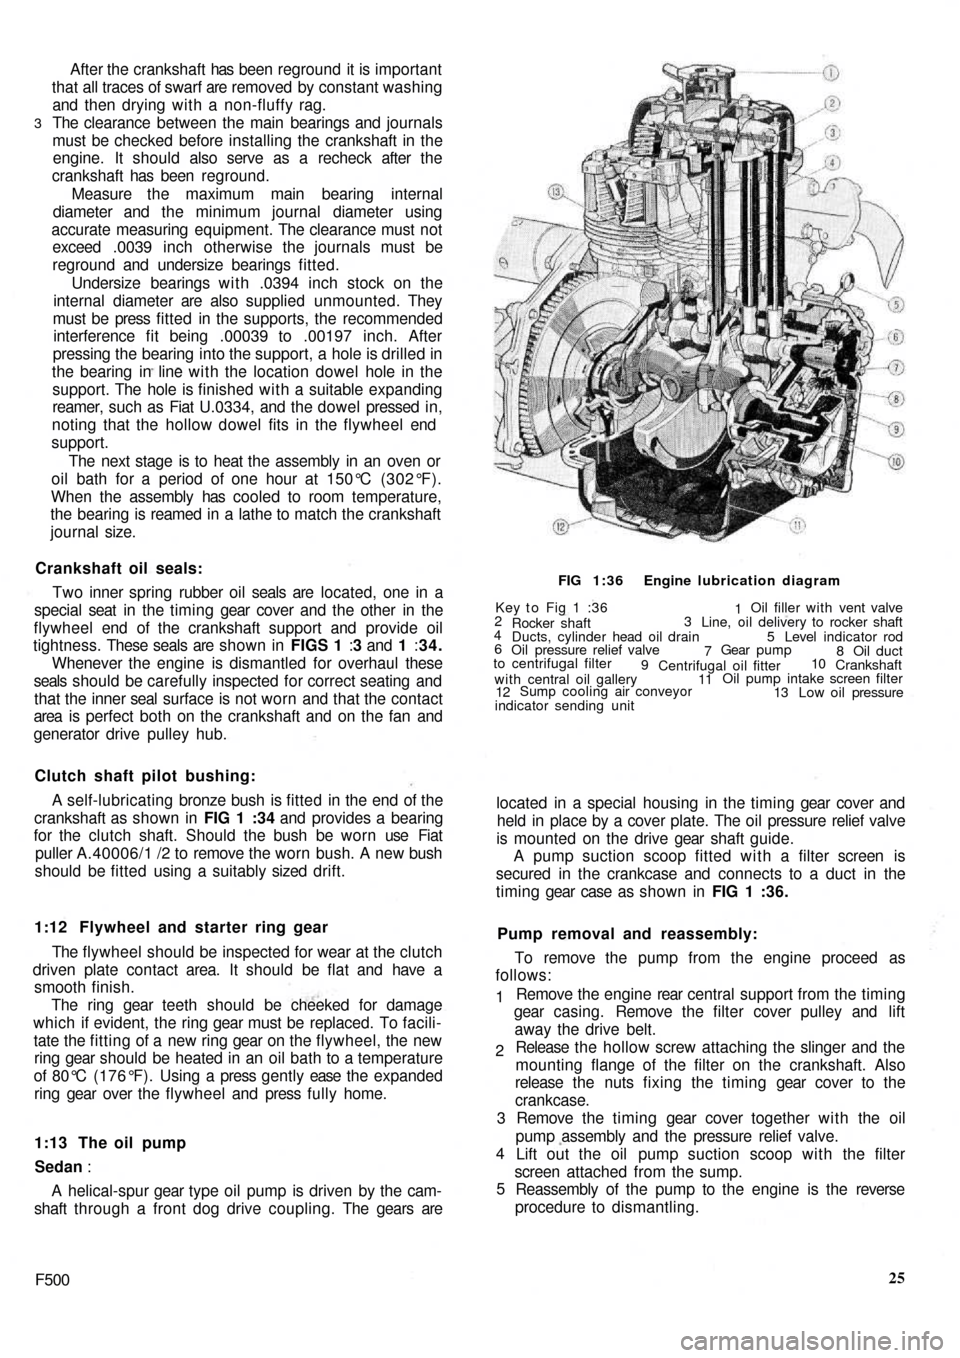 FIAT 500 1969 1.G User Guide After the  crankshaft  has been reground  it is important
that all traces of swarf are removed  by constant washing
and then drying with a non-fluffy rag.
The clearance between the main bearings and j